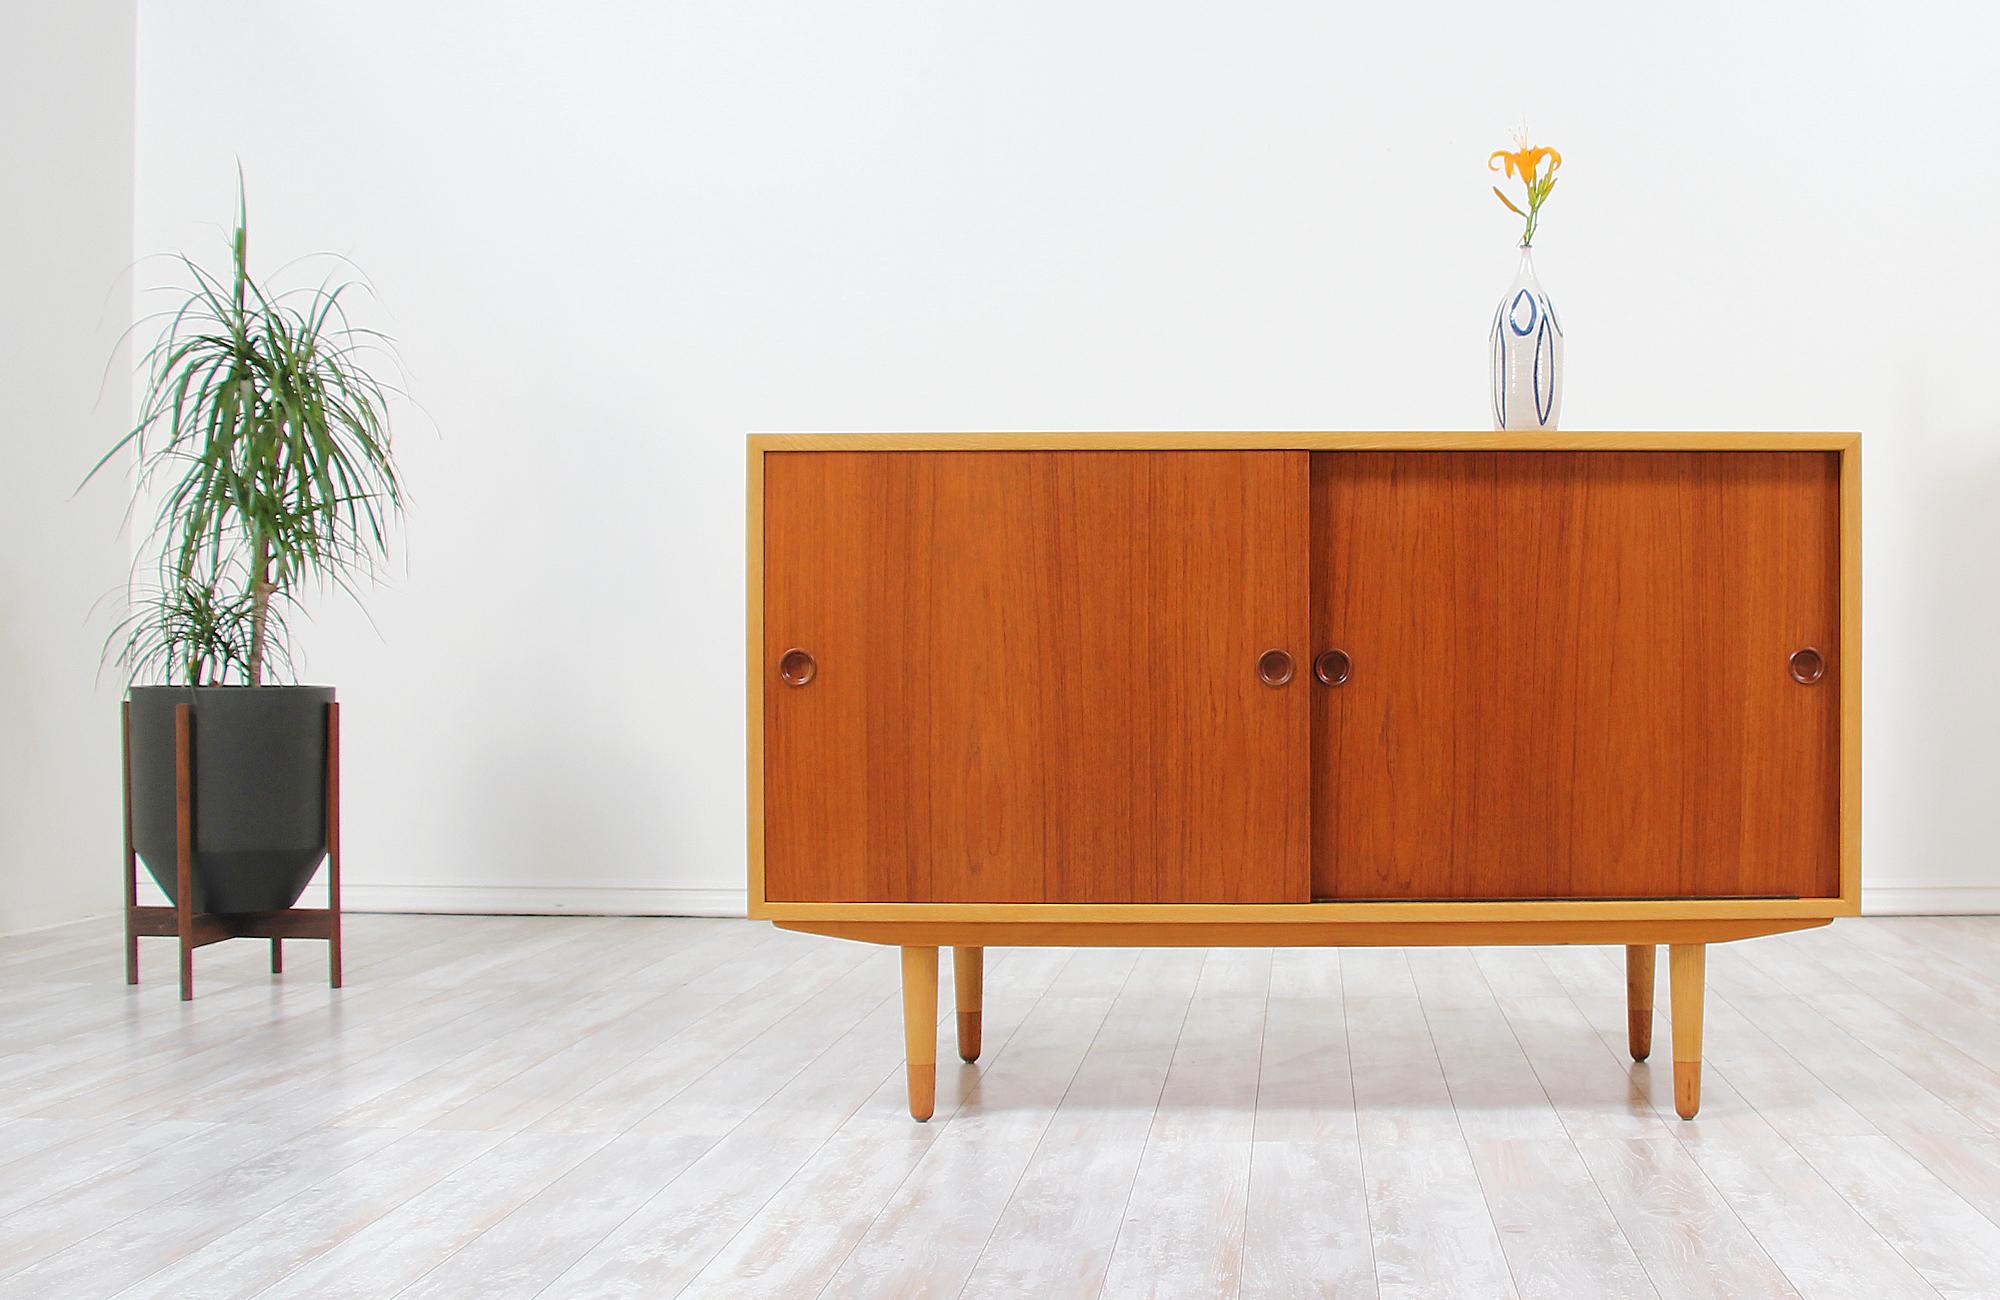 Beautiful modern credenza designed by Børge Mogensen for Søborg Møbler in Denmark, circa 1950s. This elegant multicolored credenza features a sturdy oak wood case and tapered legs with teak wood sliding doors and caps on the legs that create a clean